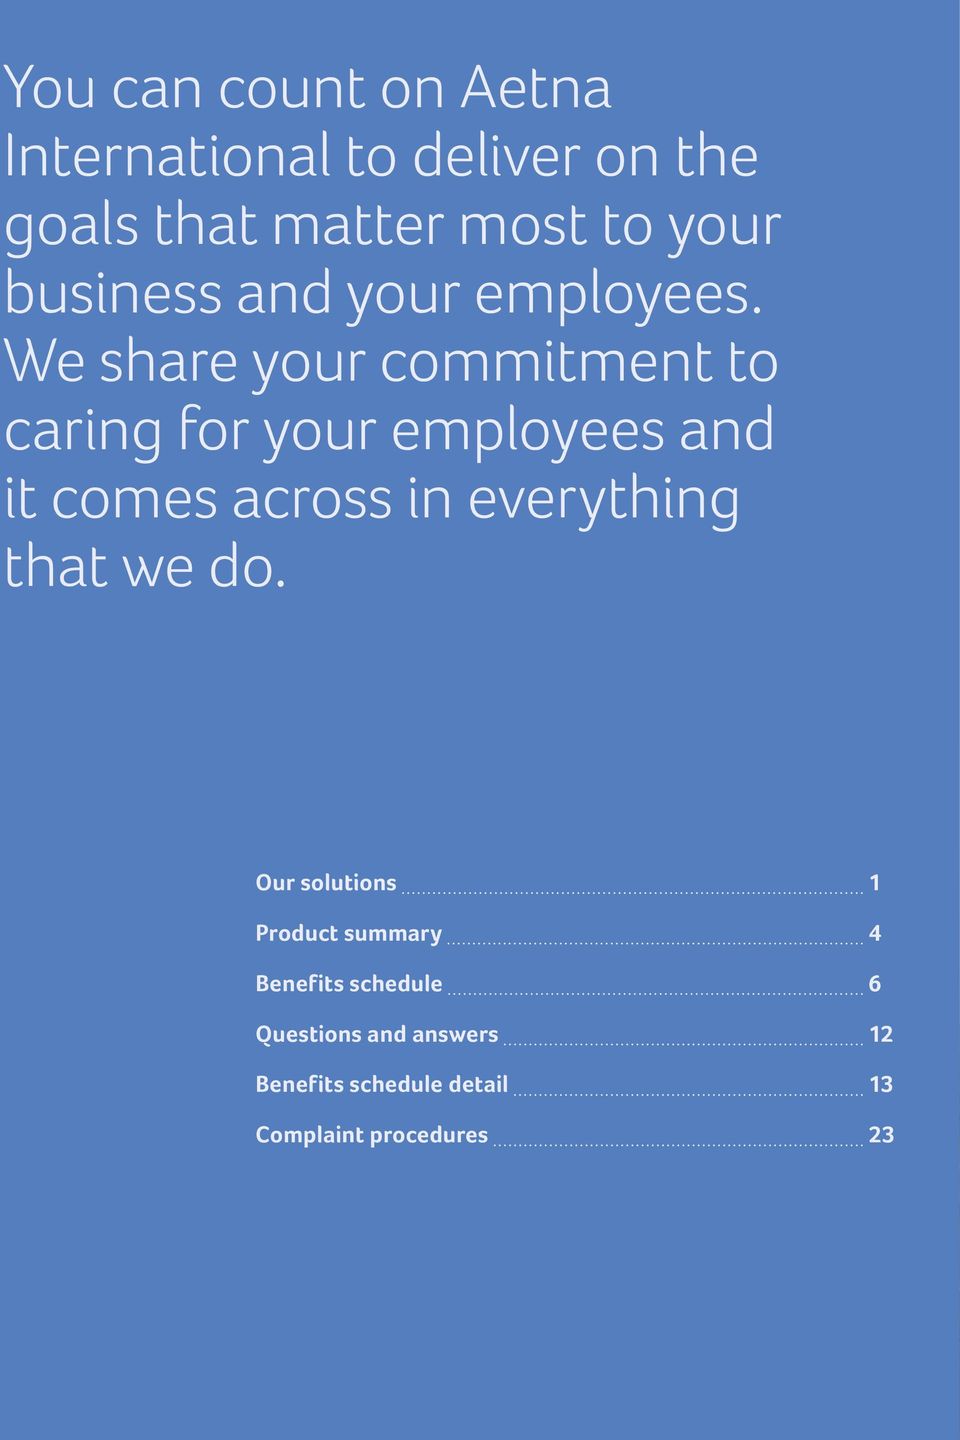 We share your commitment to caring for your employees and it comes across in